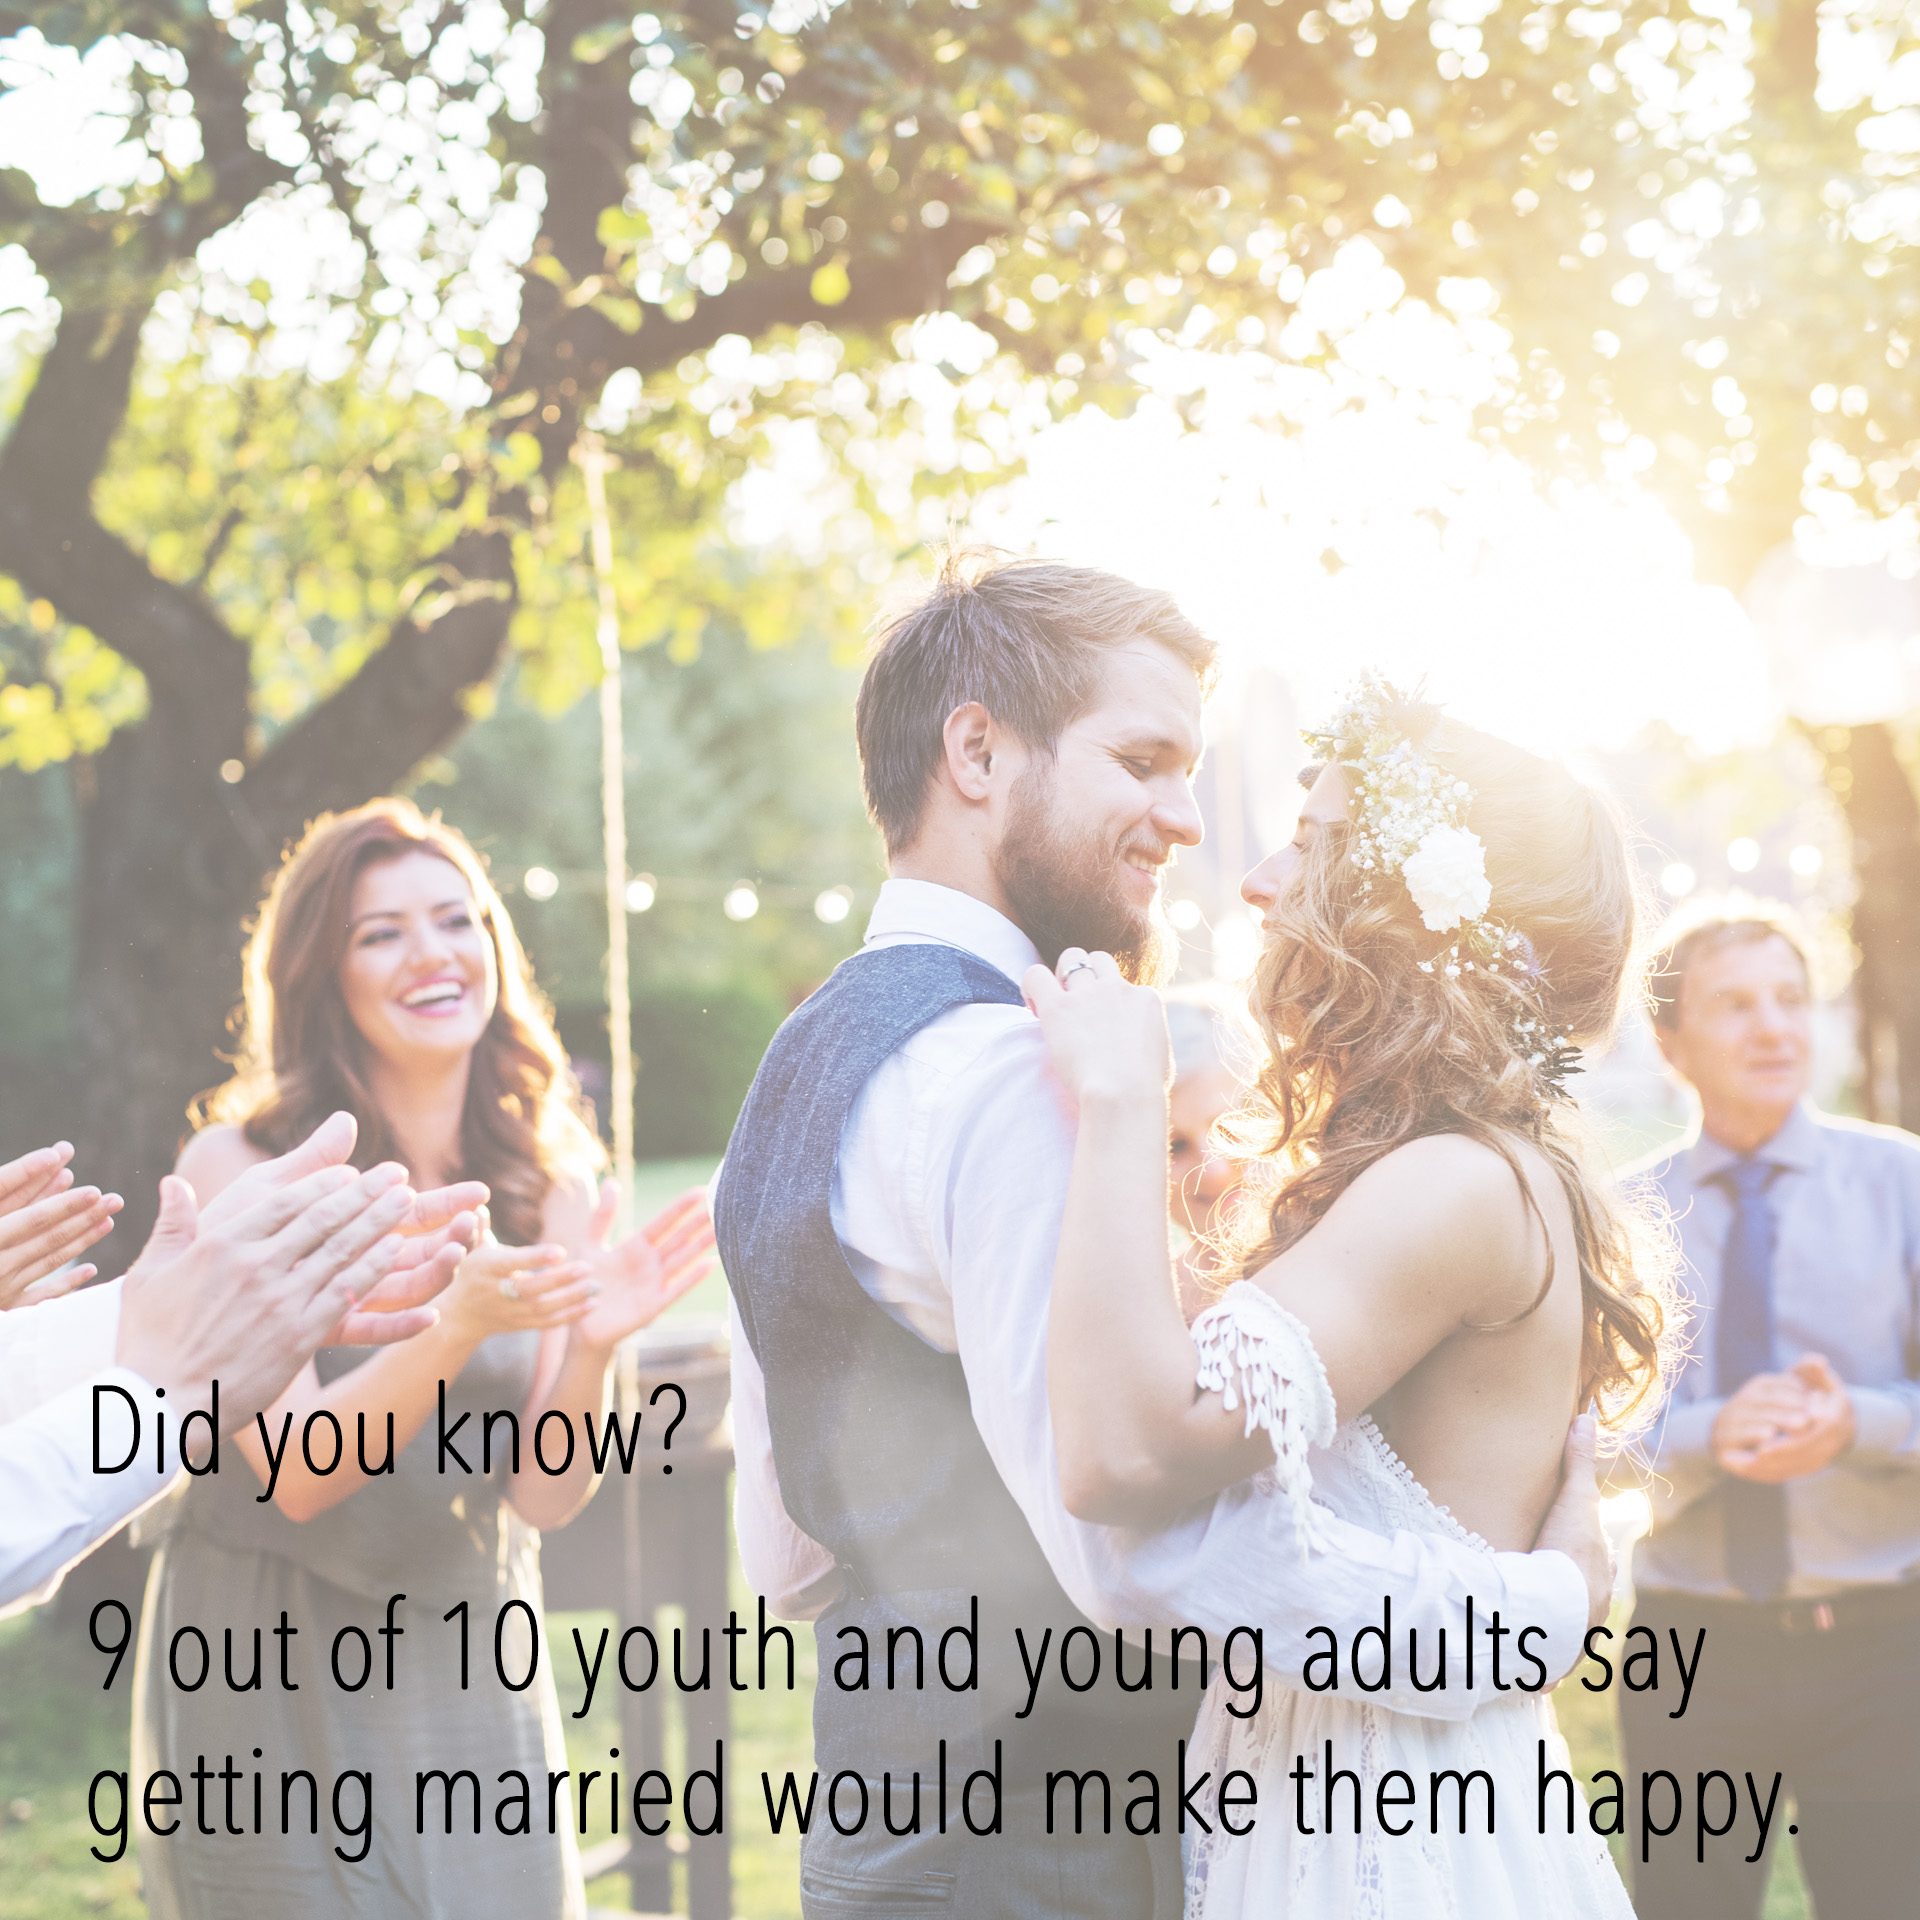 Did you know? 9 out of 10 youth and young adults say getting married would make them happy. 